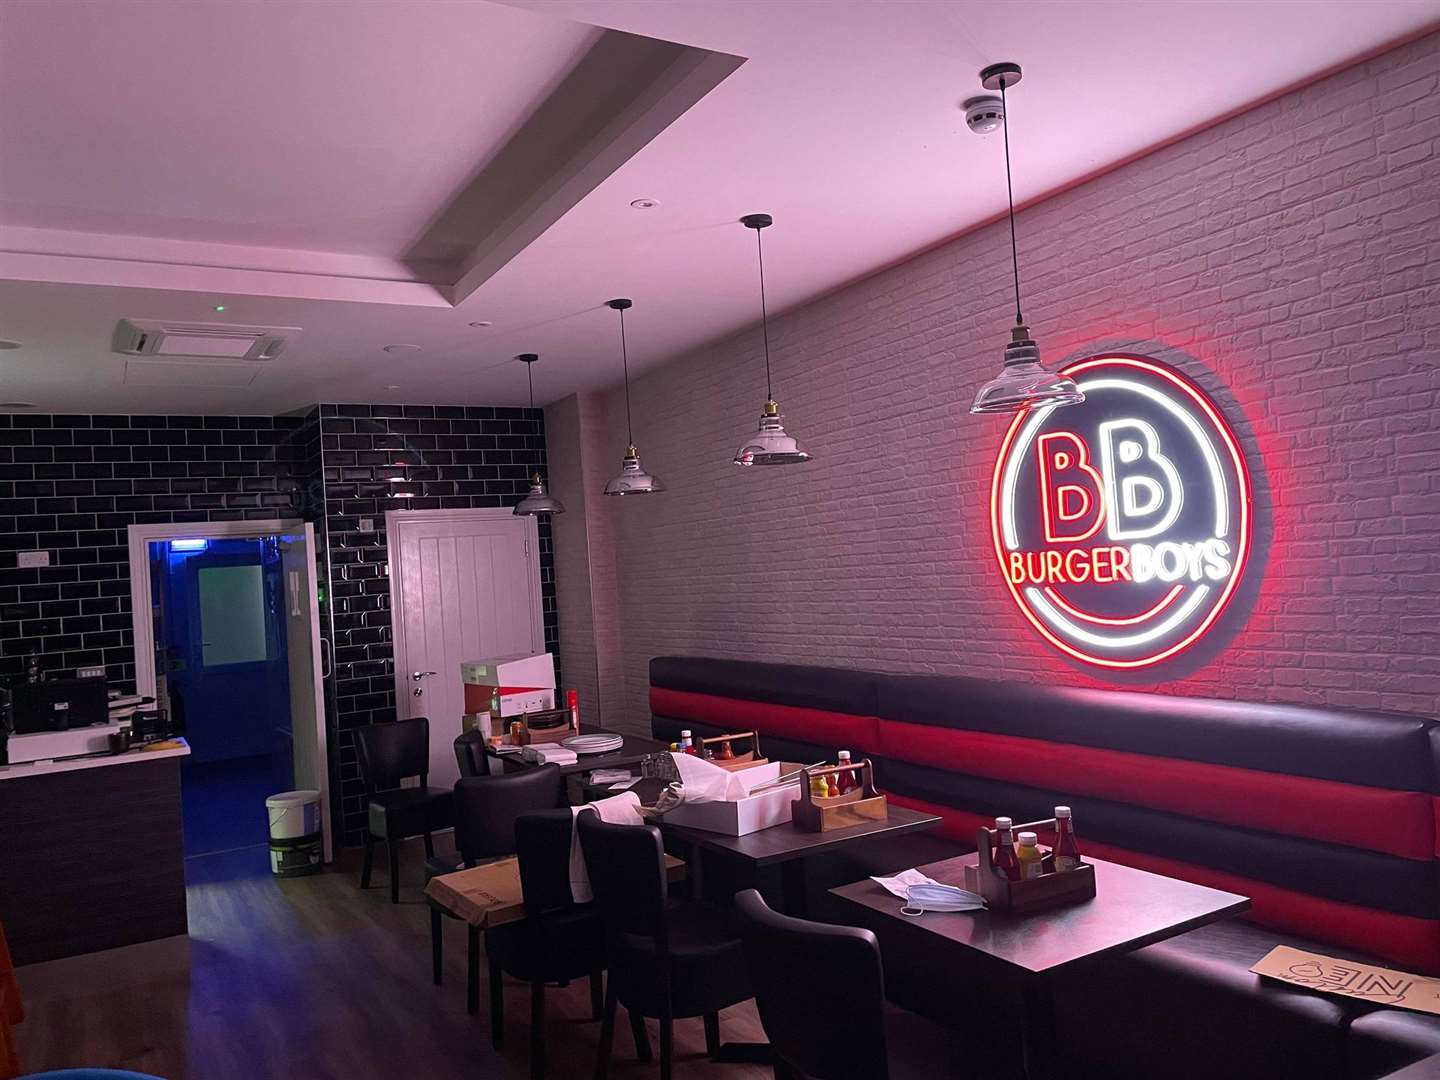 Ash Miah has completely transformed the unit ahead of Burger Boys' opening